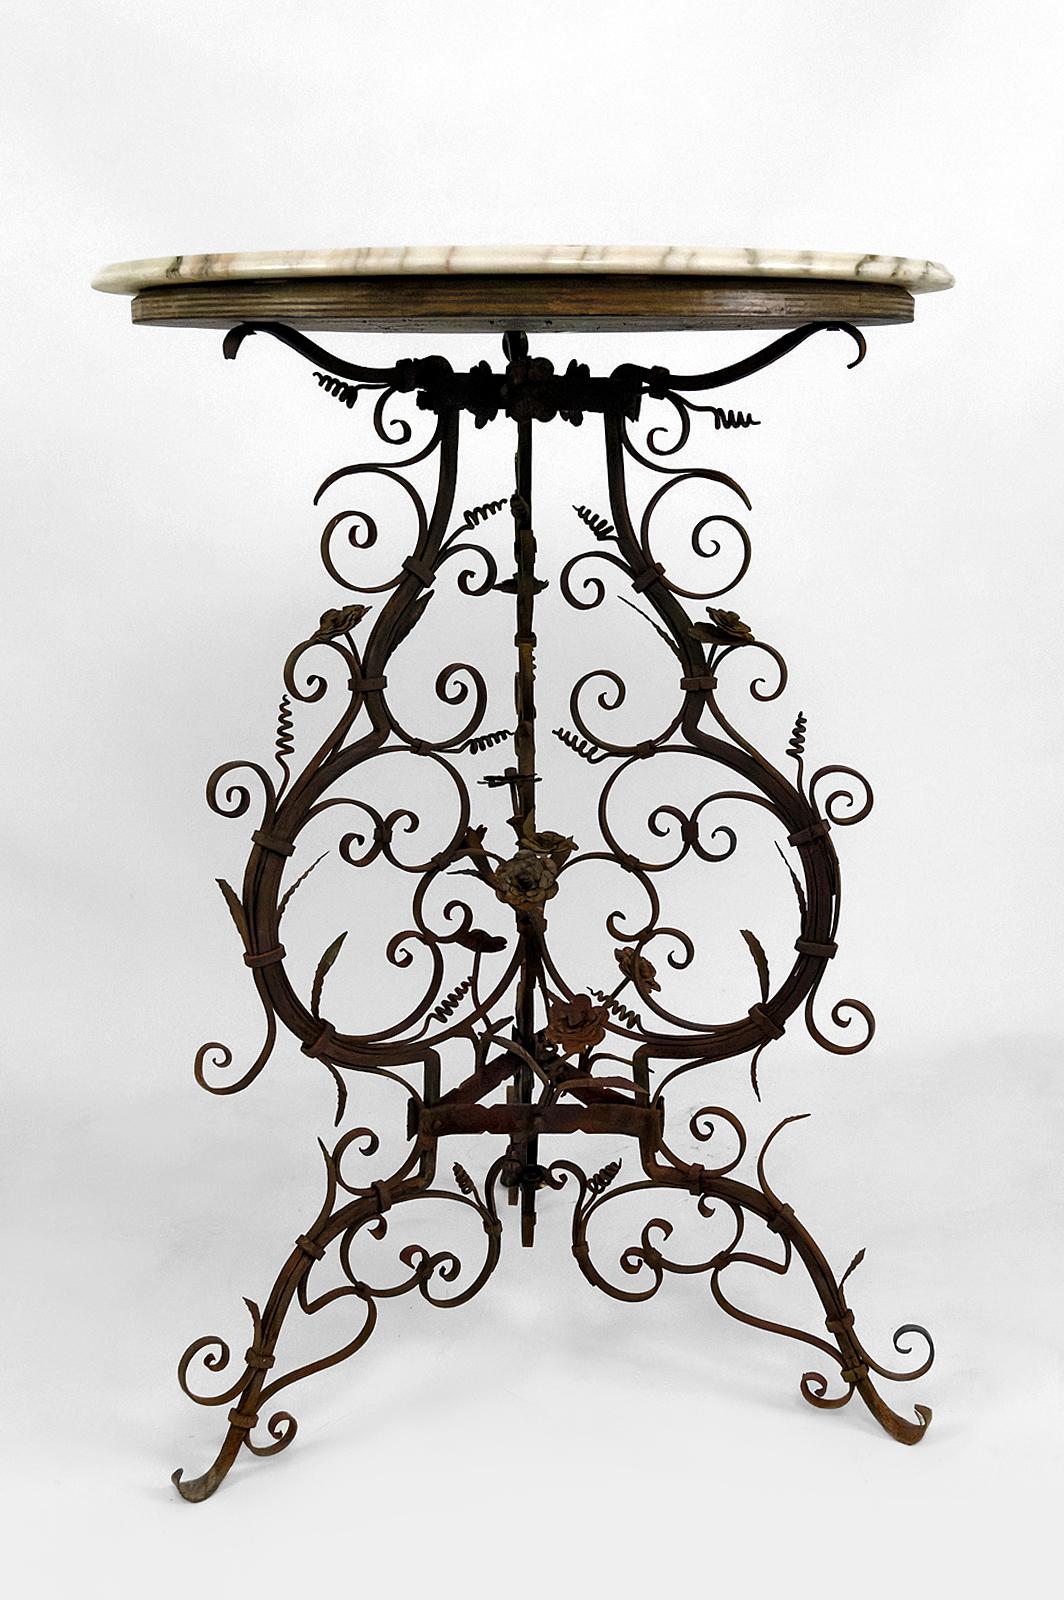 Wrought iron pedestal table / side table and marble top, Venice, Italy, 17th For Sale 5